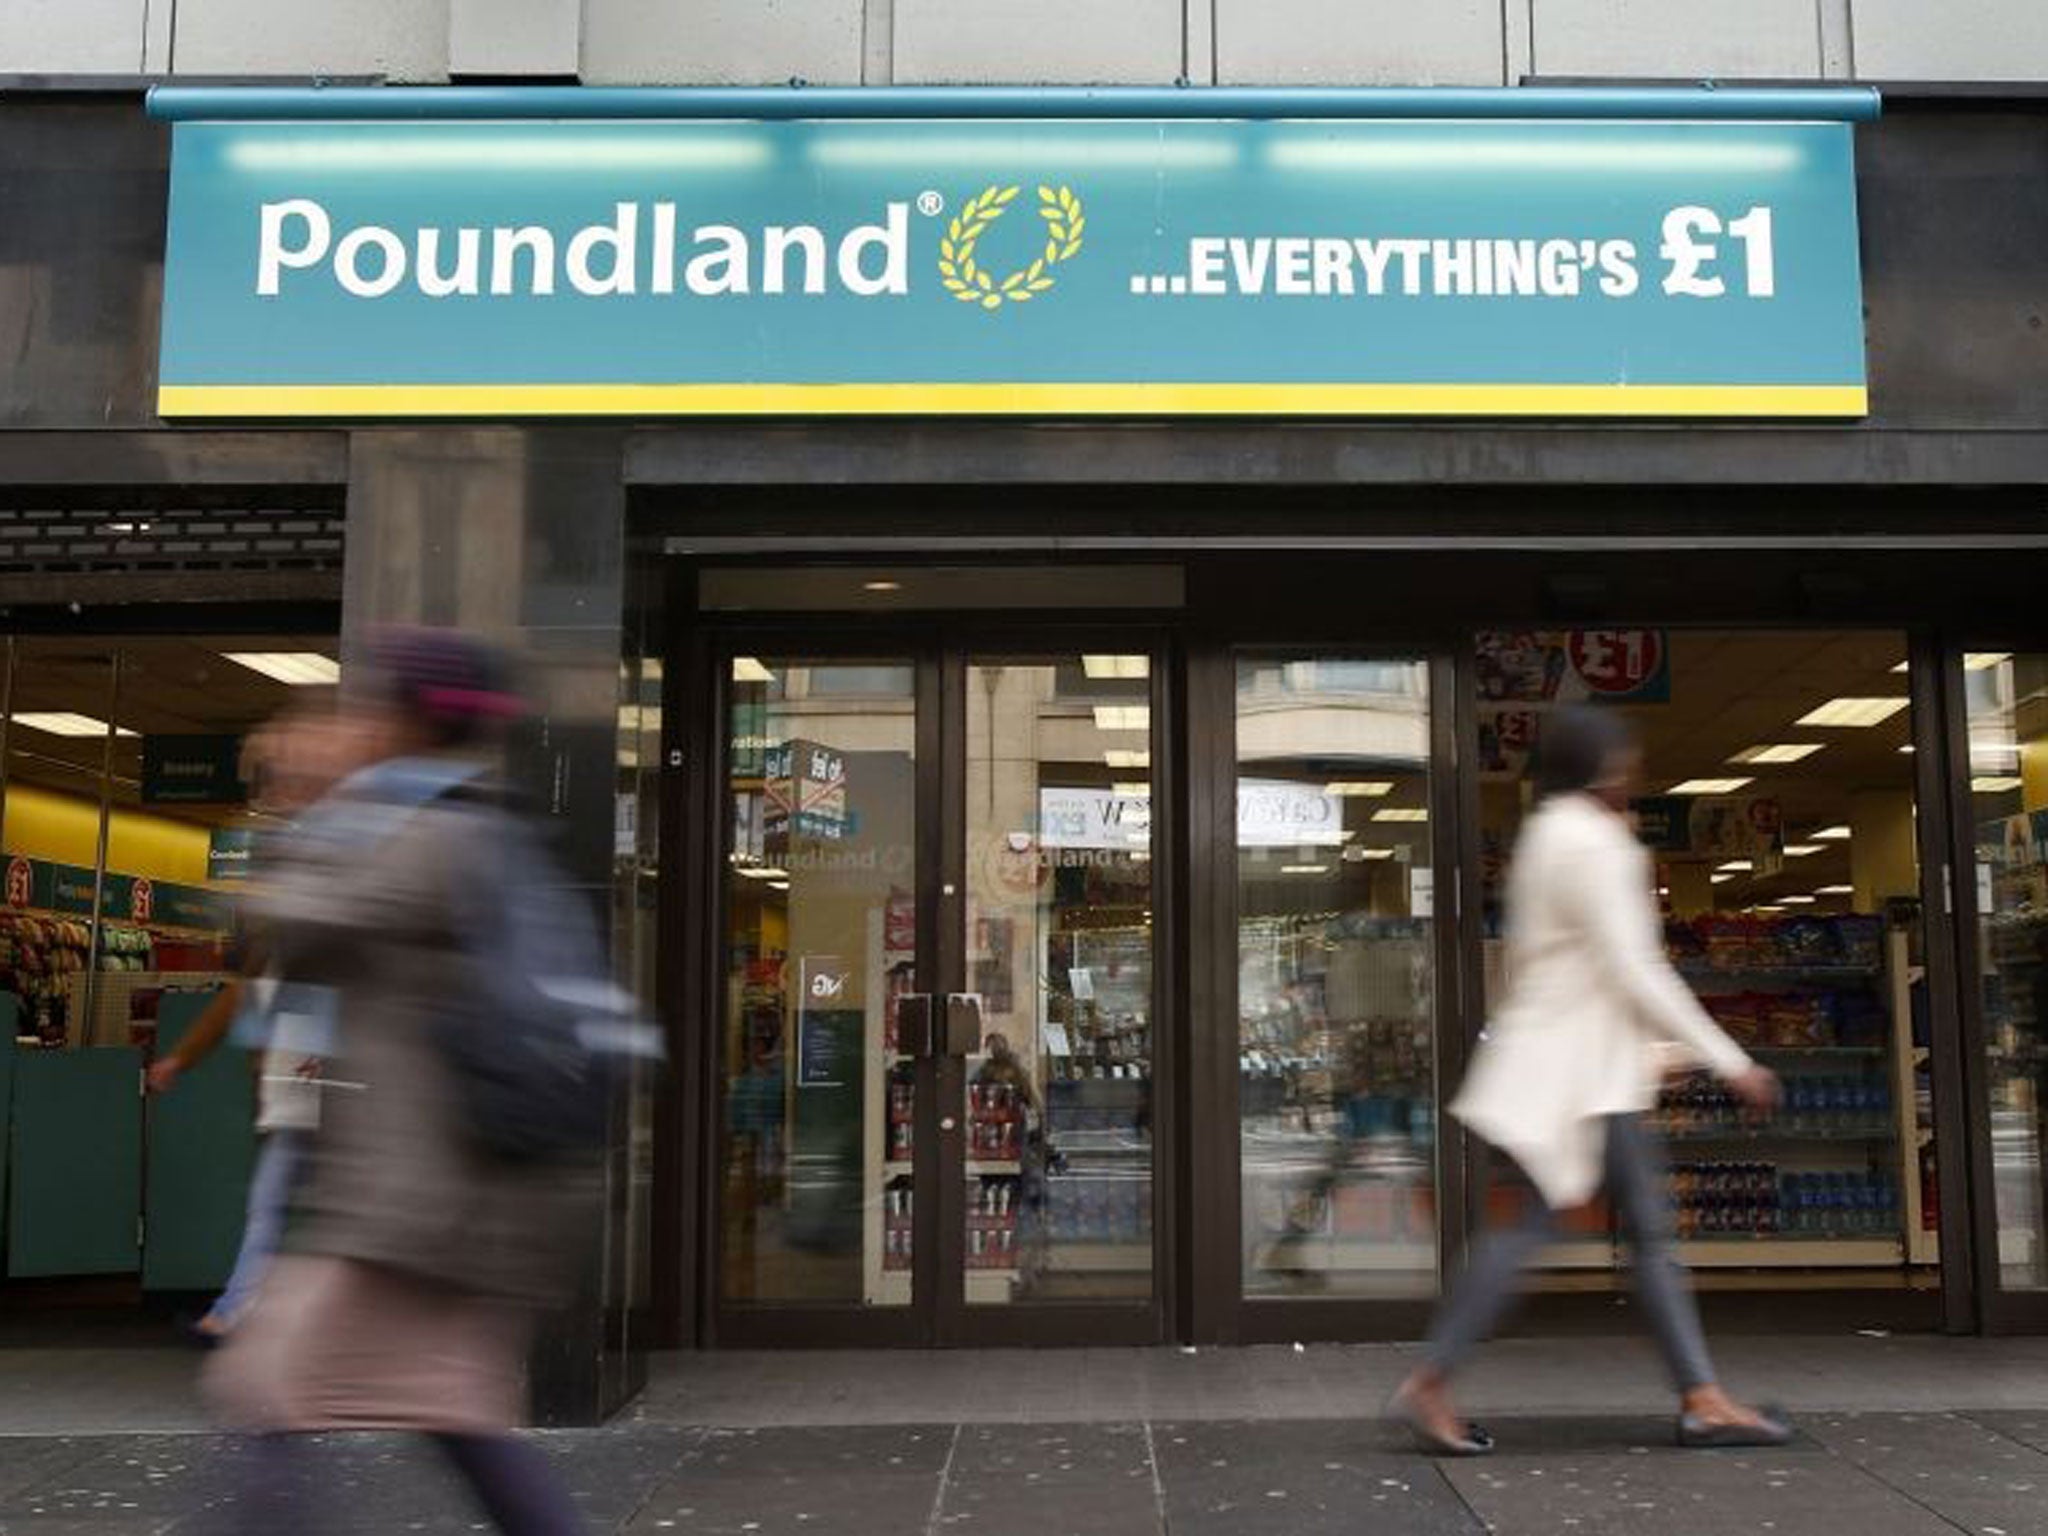 If successful the deal would see Poundland with more stores than WH Smith’s high street portfolio and bigger than both Aldi and Lidl